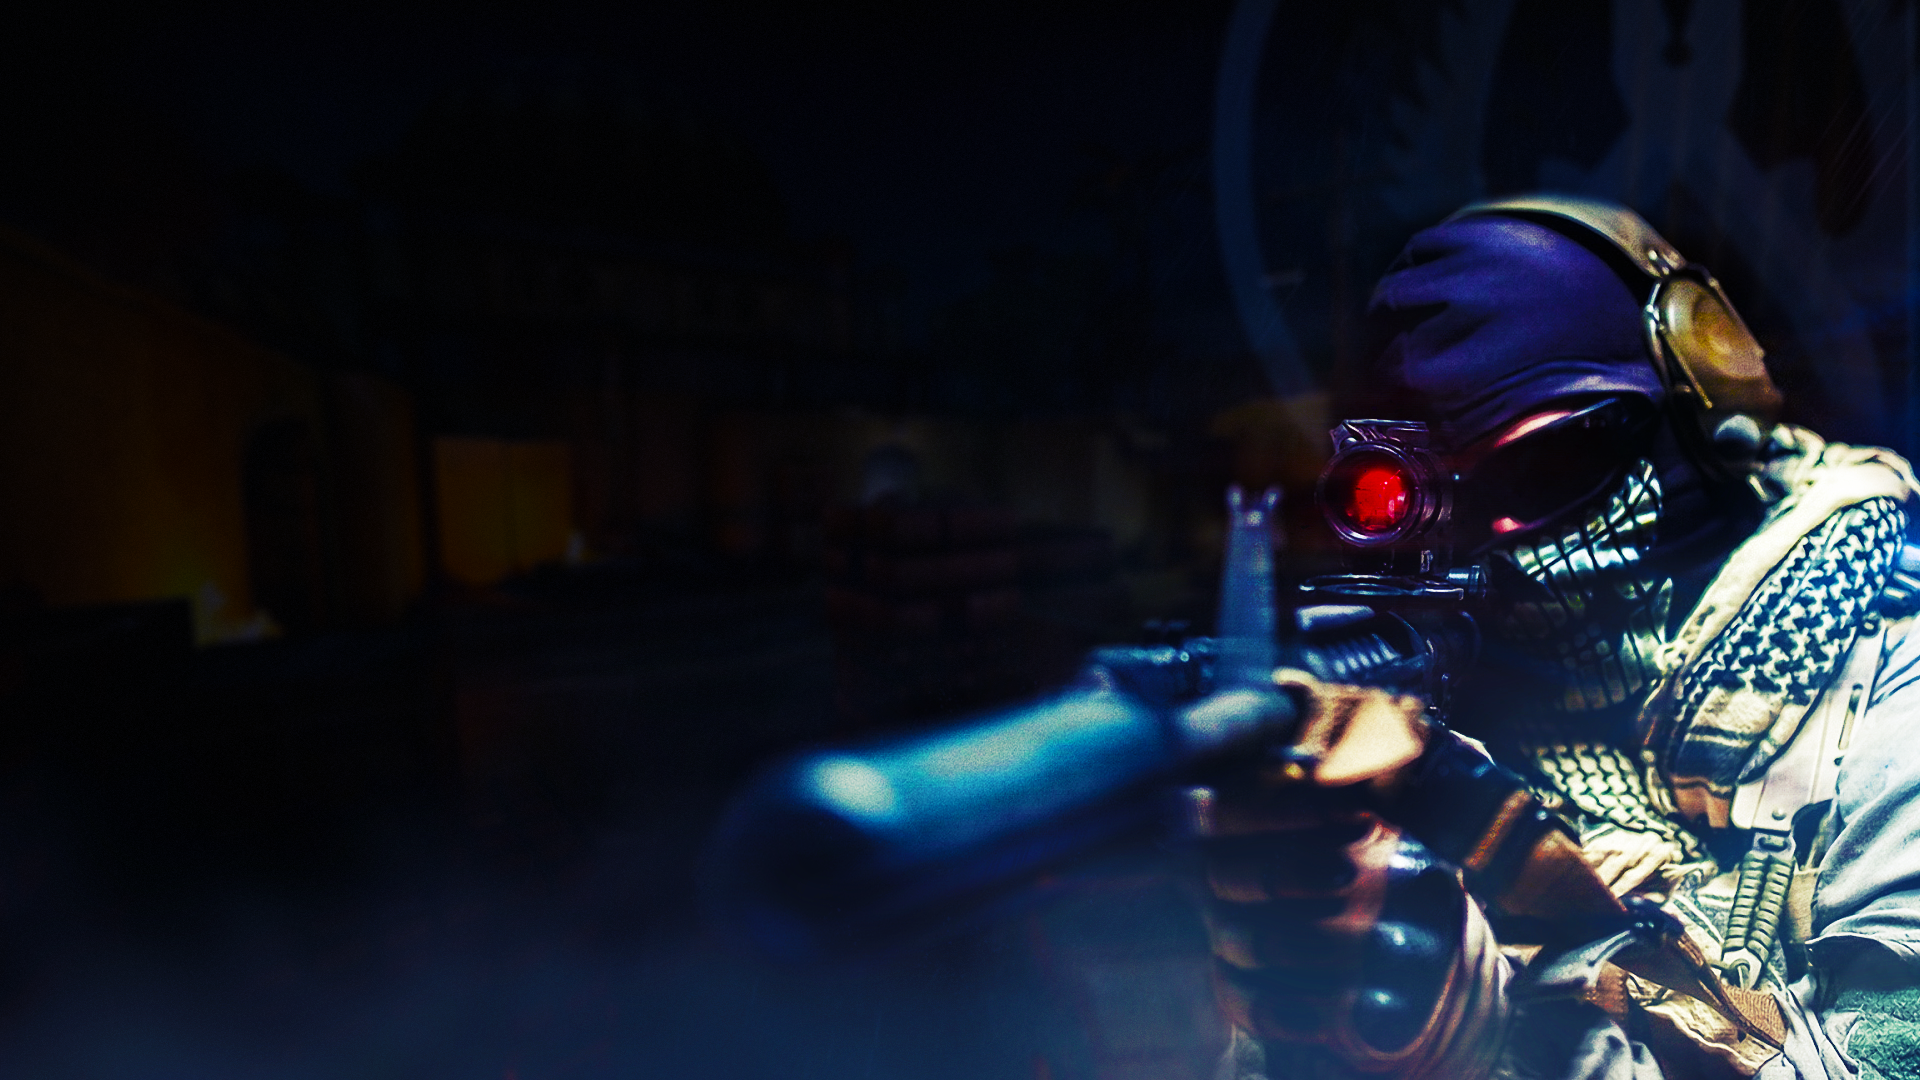 Counter-Strike: Global Offensive Wallpaper by Kothanos on ...